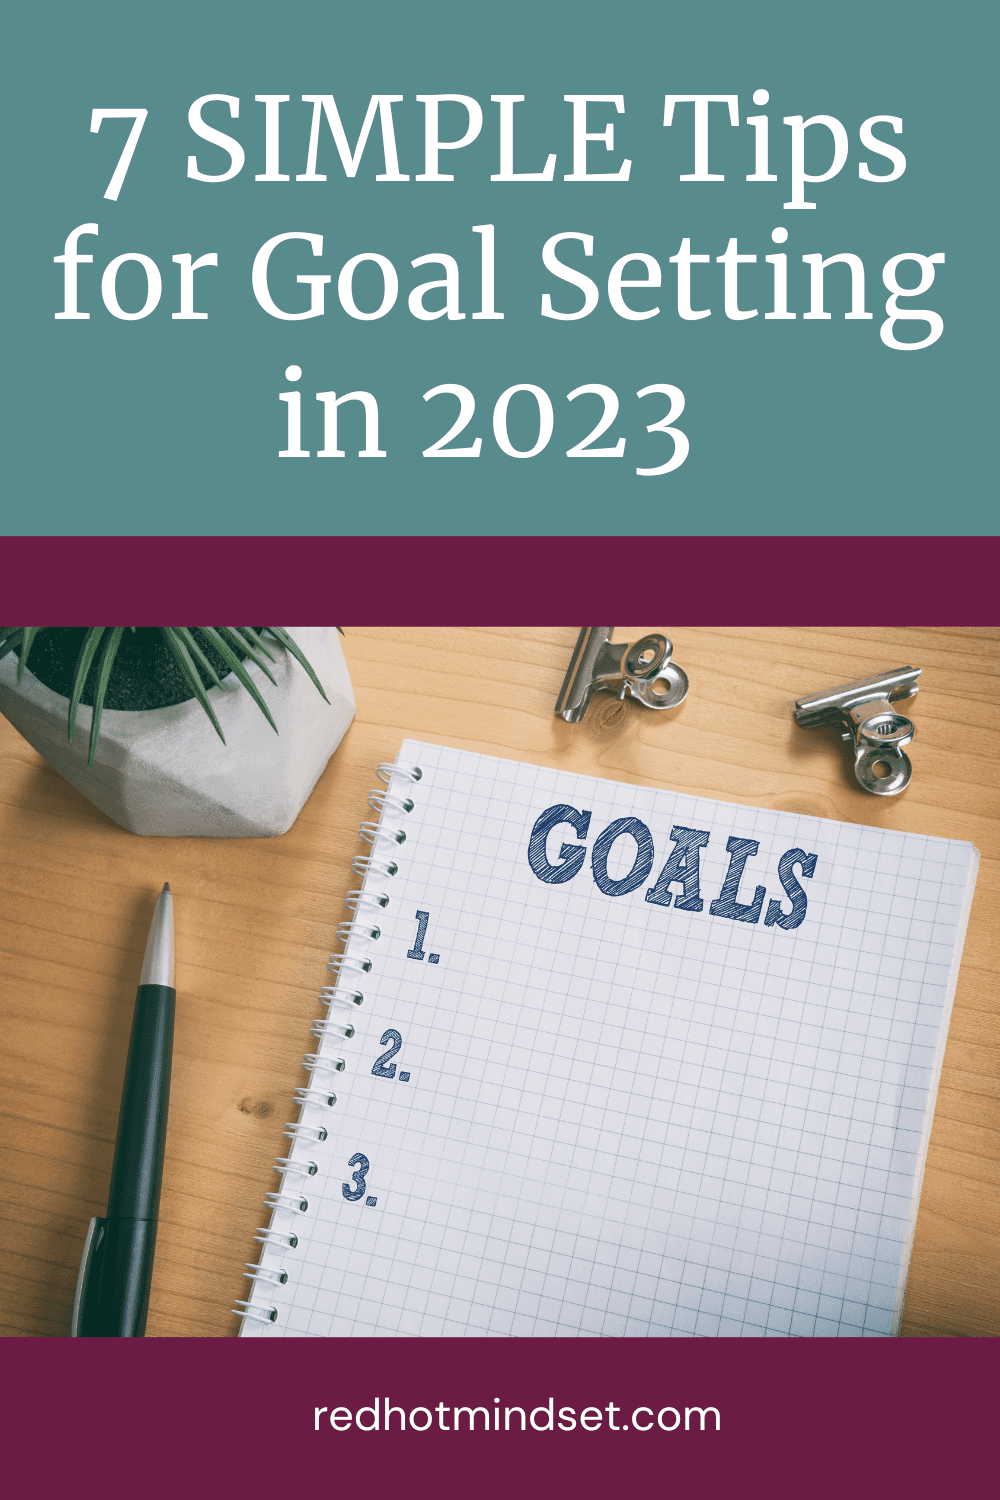 Pinterest cover with a notebook and pen sitting on the table and 1, 2, 3 written on the paper for goal setting. Title of cover is 7 simple tips for goal setting in 2023